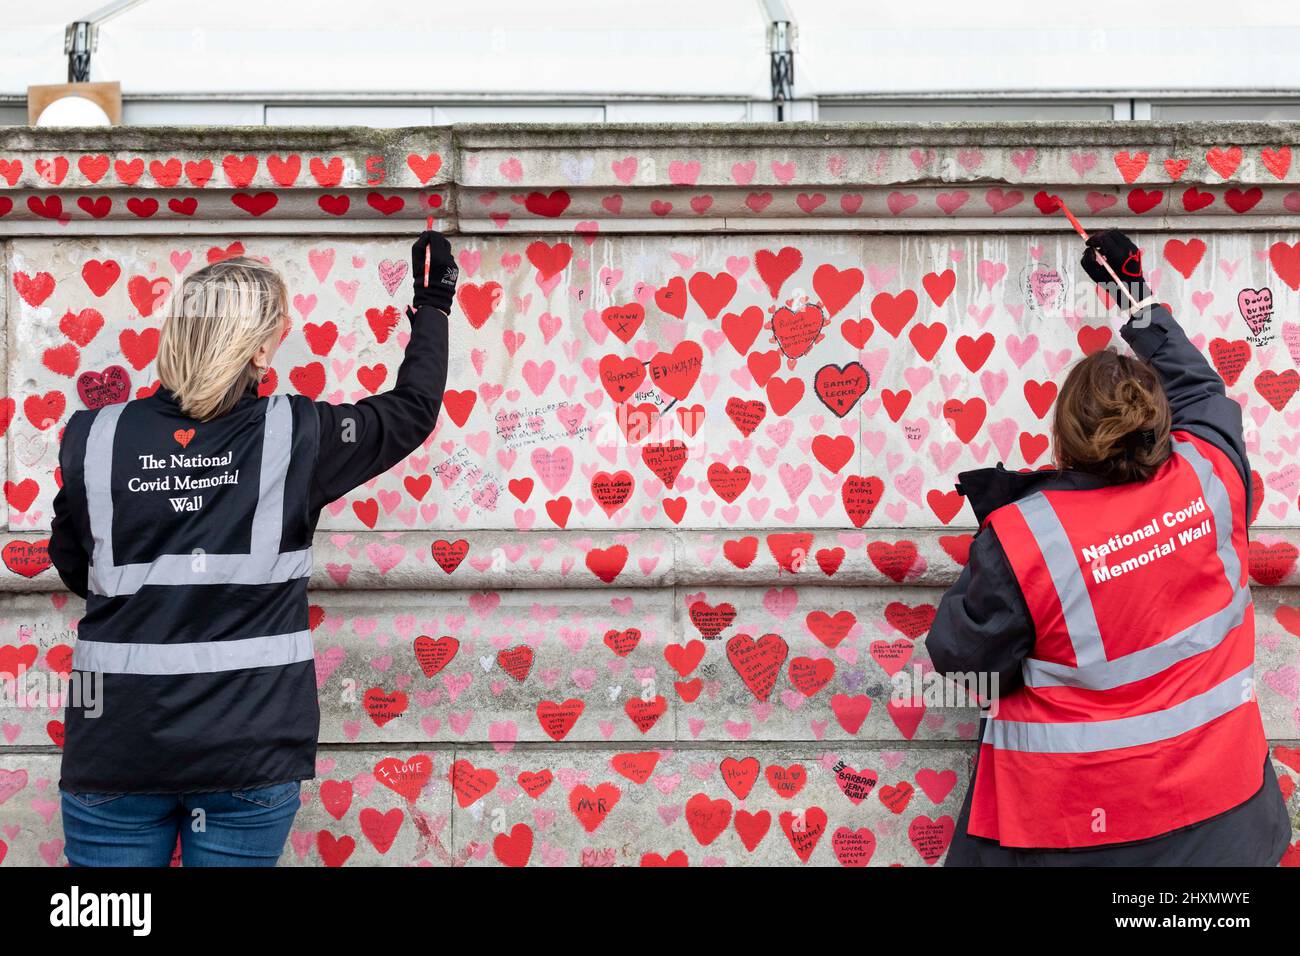 29th March 2022 marks the one year anniversary of the first heart being drawn on the Covid 19 National Memorial Wall. On the day, the Covid 19 Bereave Stock Photo